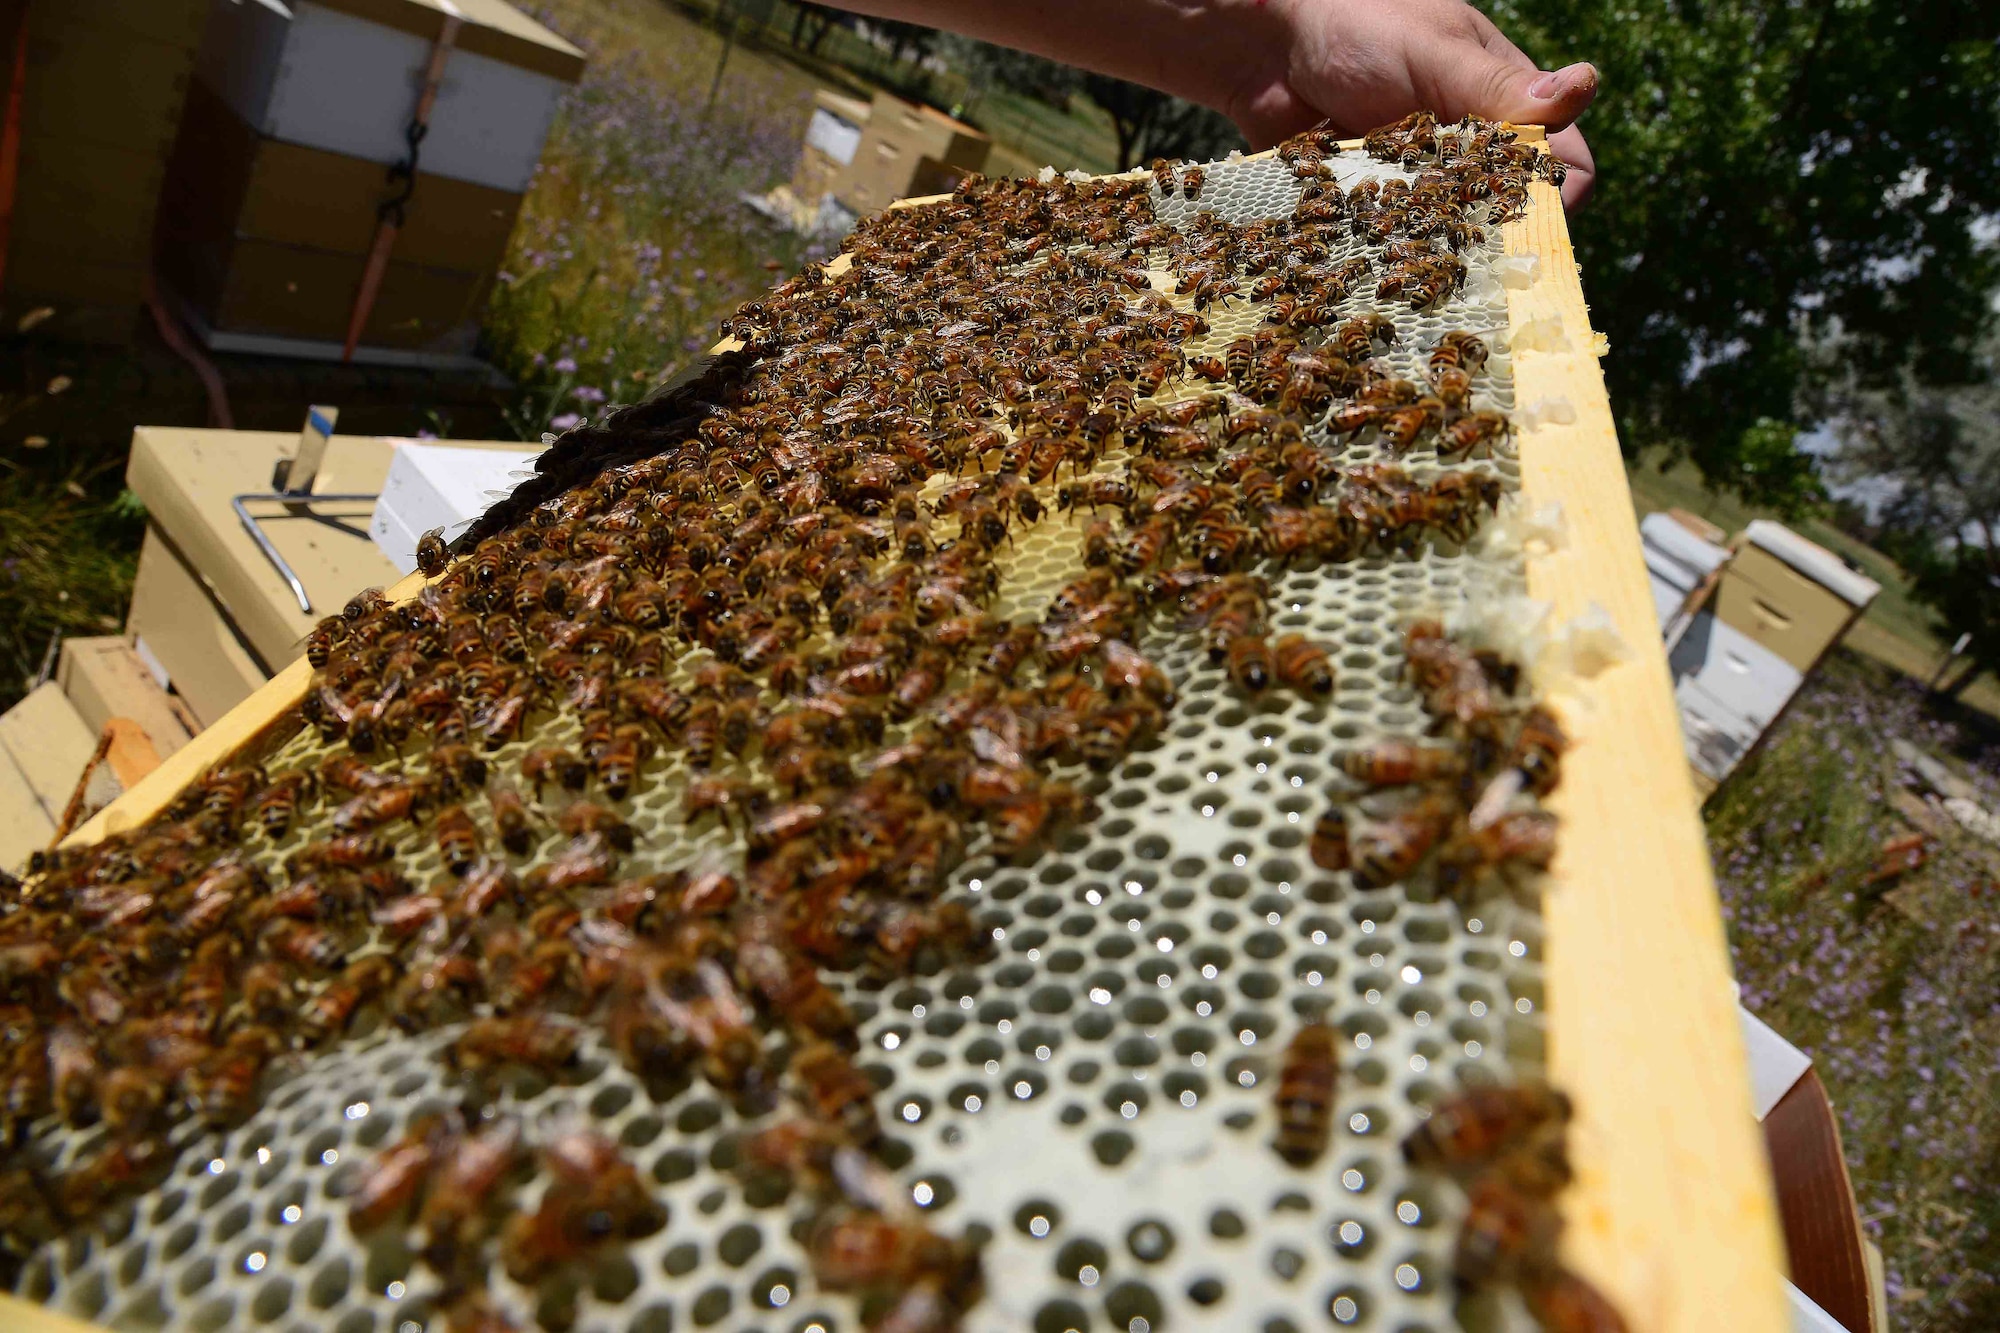 Retired Maj. Brian Rogers, a master beekeeper with the Great Falls Wanna-Beekeeping Club, shows the progress of 25,000 relocated honey bees July 26, 2016, at Great Falls, Mont. The bees were discovered at Malmstrom Air Force Base, Mont. where they were humanely relocated to a more suitable home on Rogers’ honey bee compound. (U.S. Air Force photo/Airman 1st Class Magen M. Reeves)